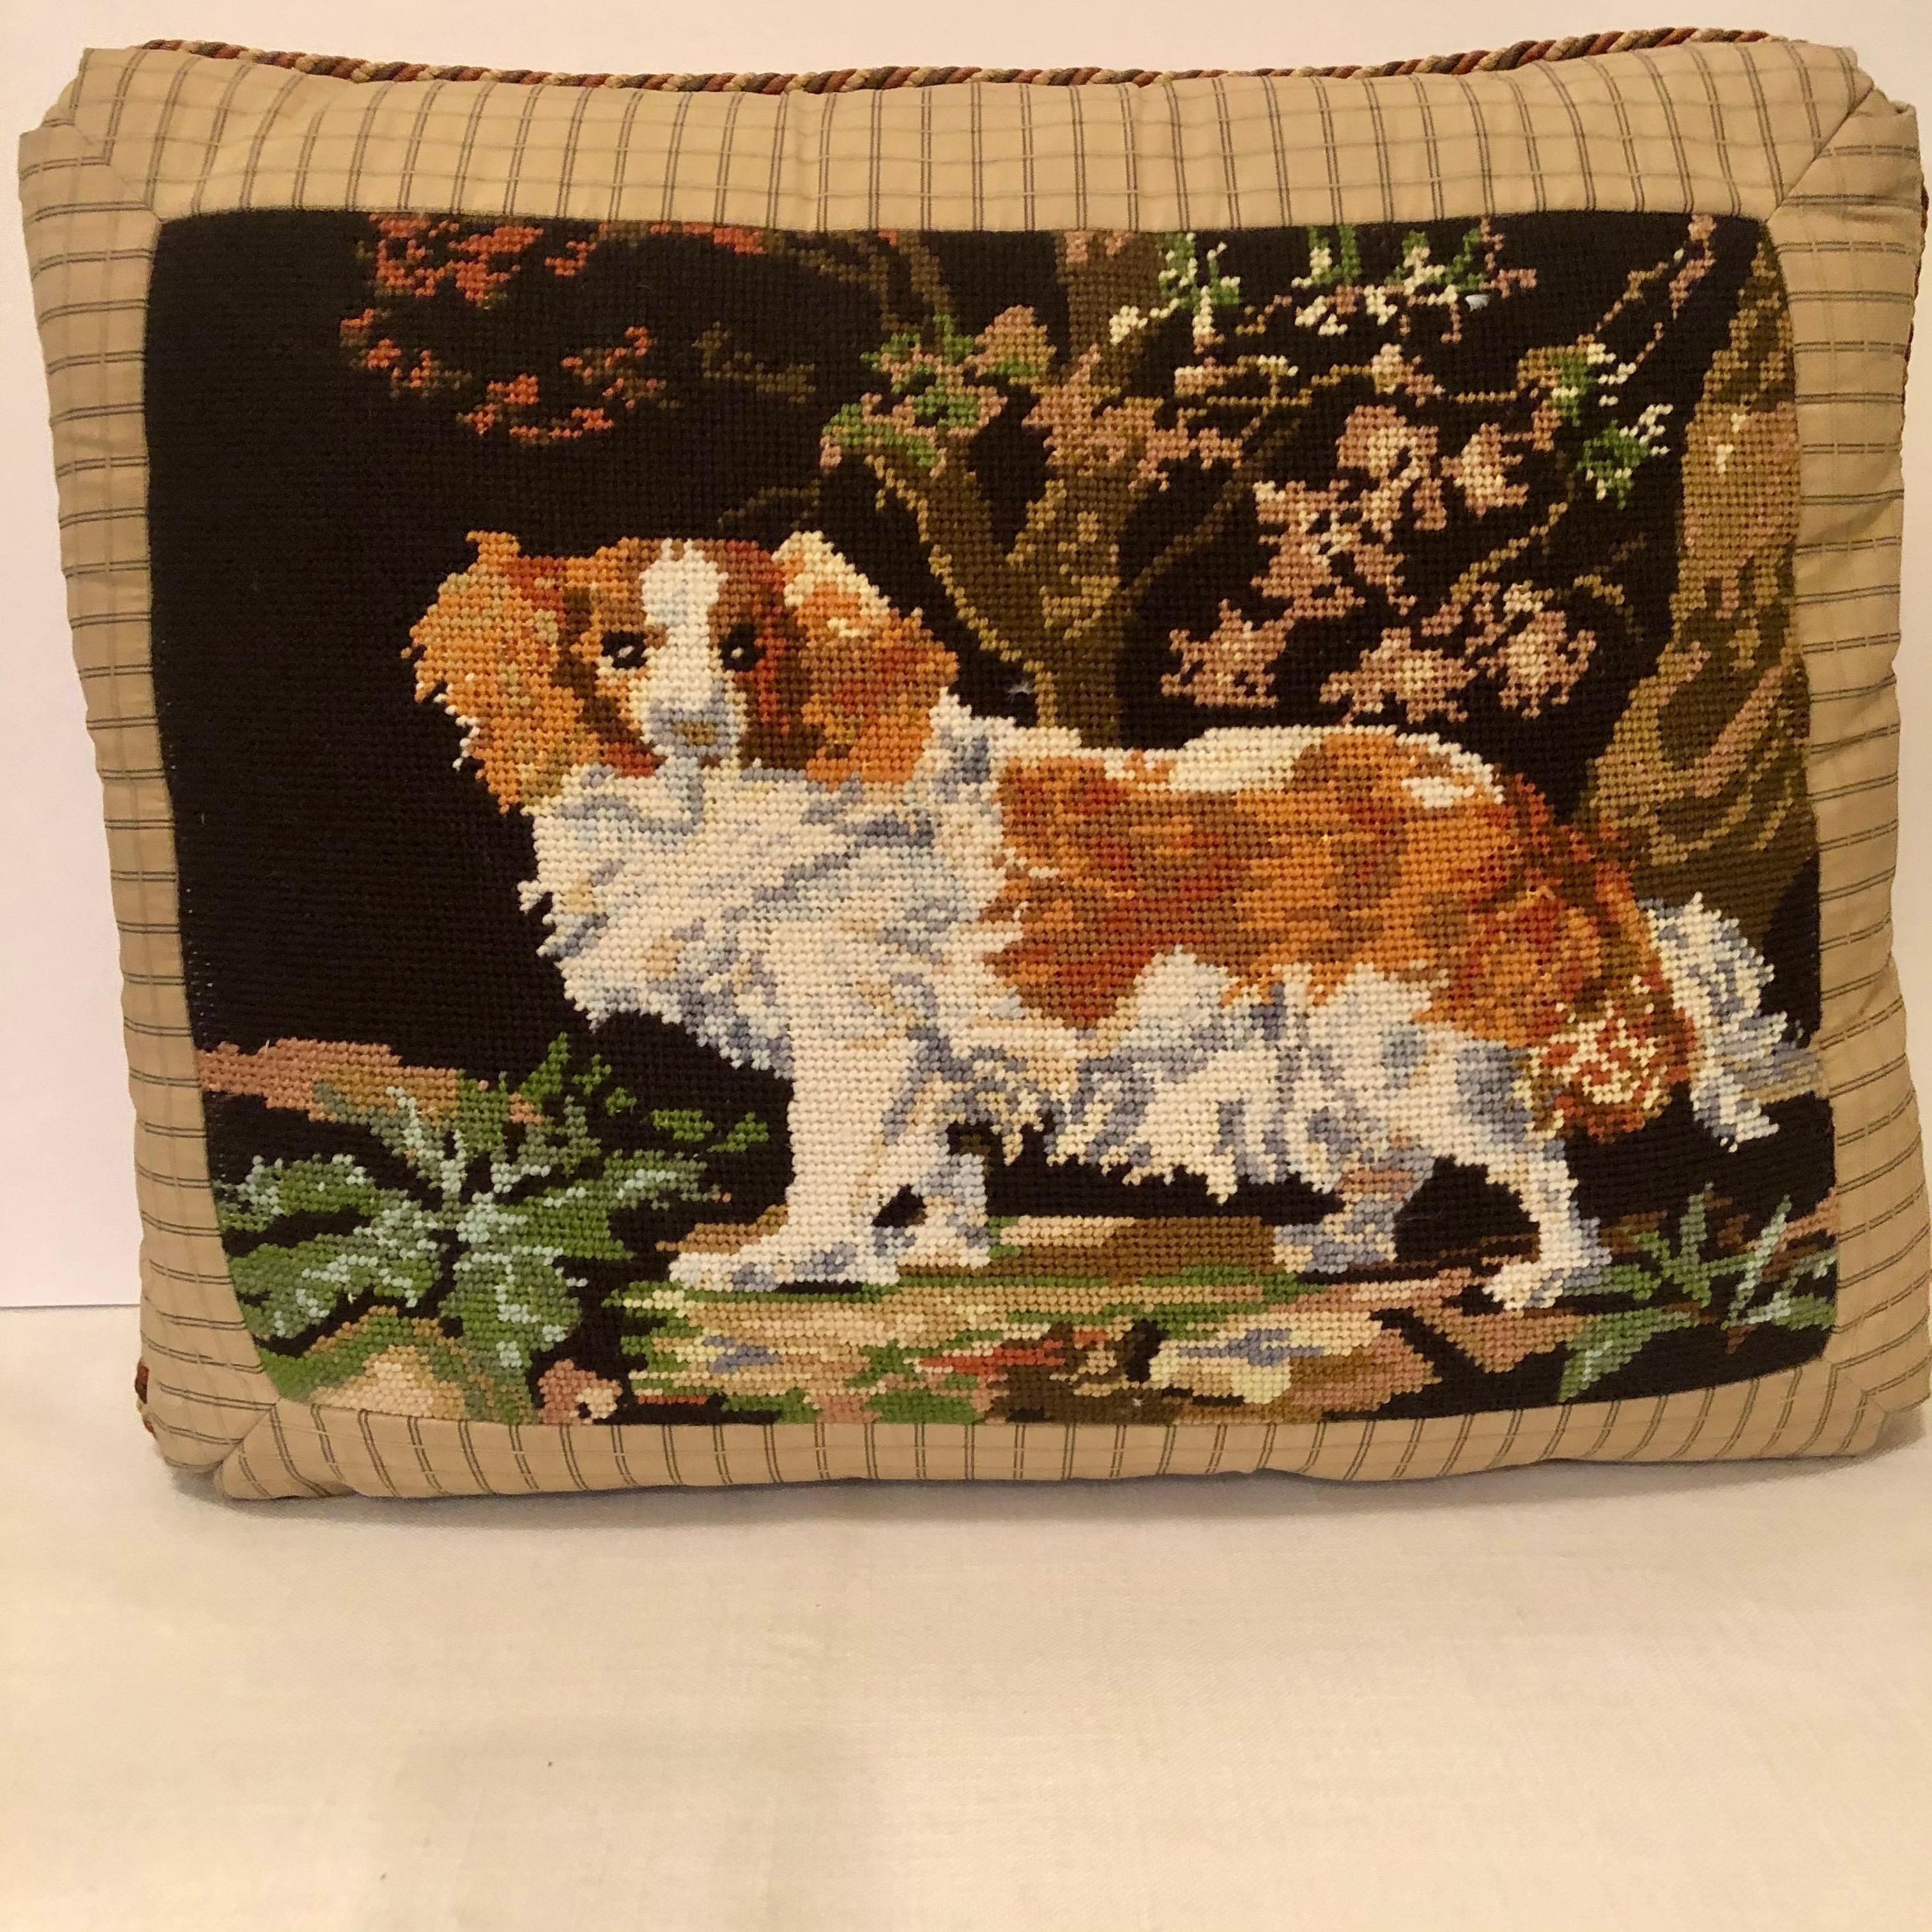 Victorian Needlepoint Pillow with King Charles Spaniel Playing in the Woods